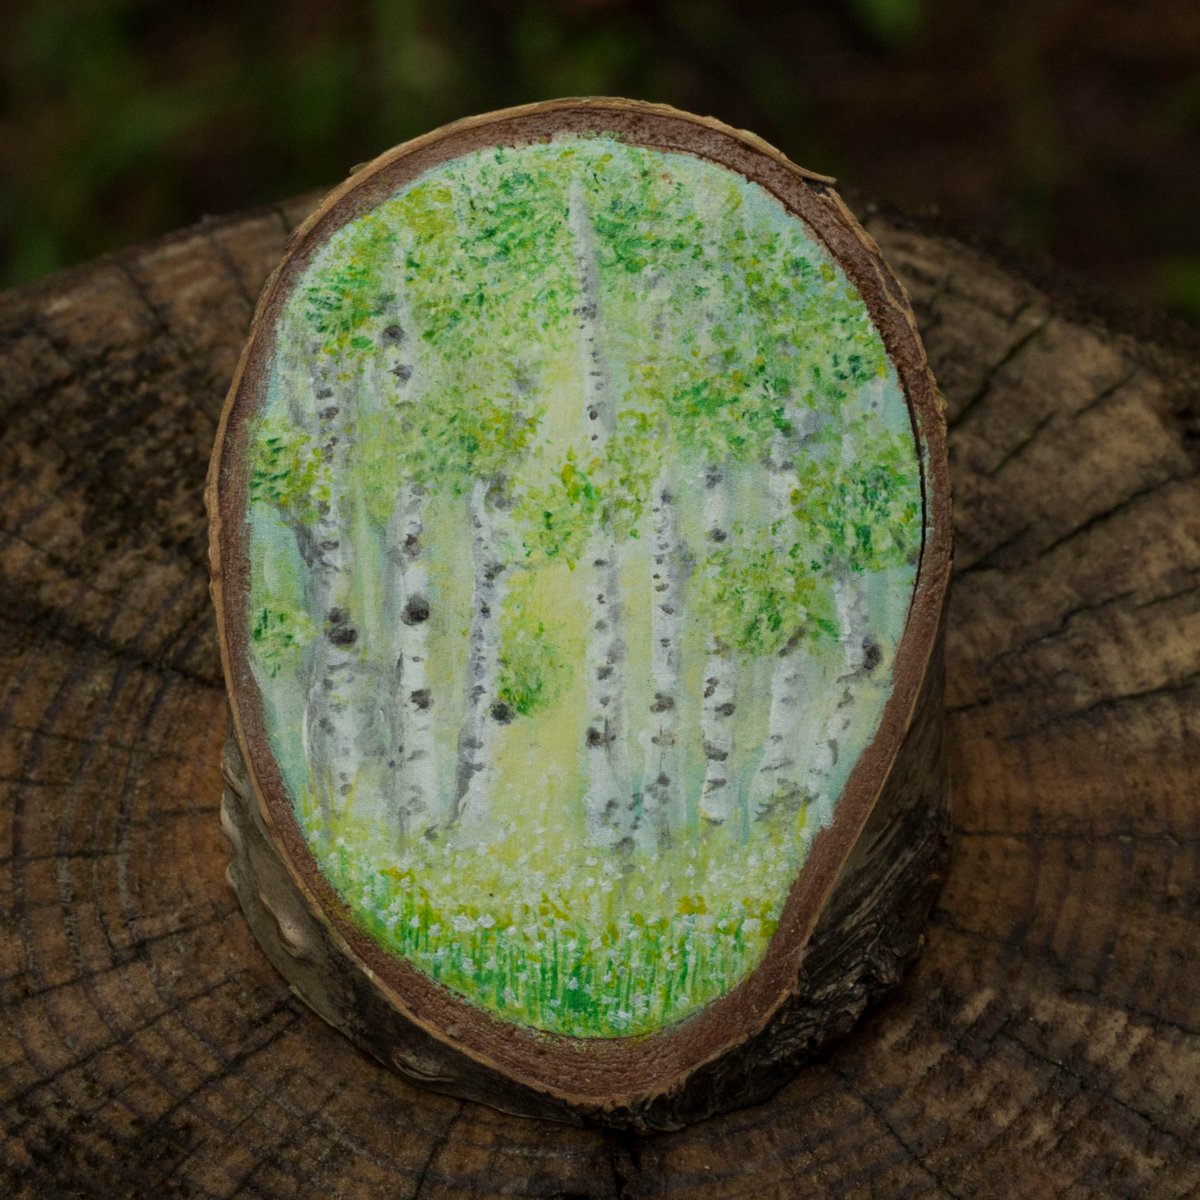 Hello! #myfirstTweet 
I love turning my #adventures into #art .
#handmade and #handpainted  miniature from recycled birch branches.

#artwork  #acrylicpainting  #painting #acryliconwood #ArtistOnTwitter #naturelover